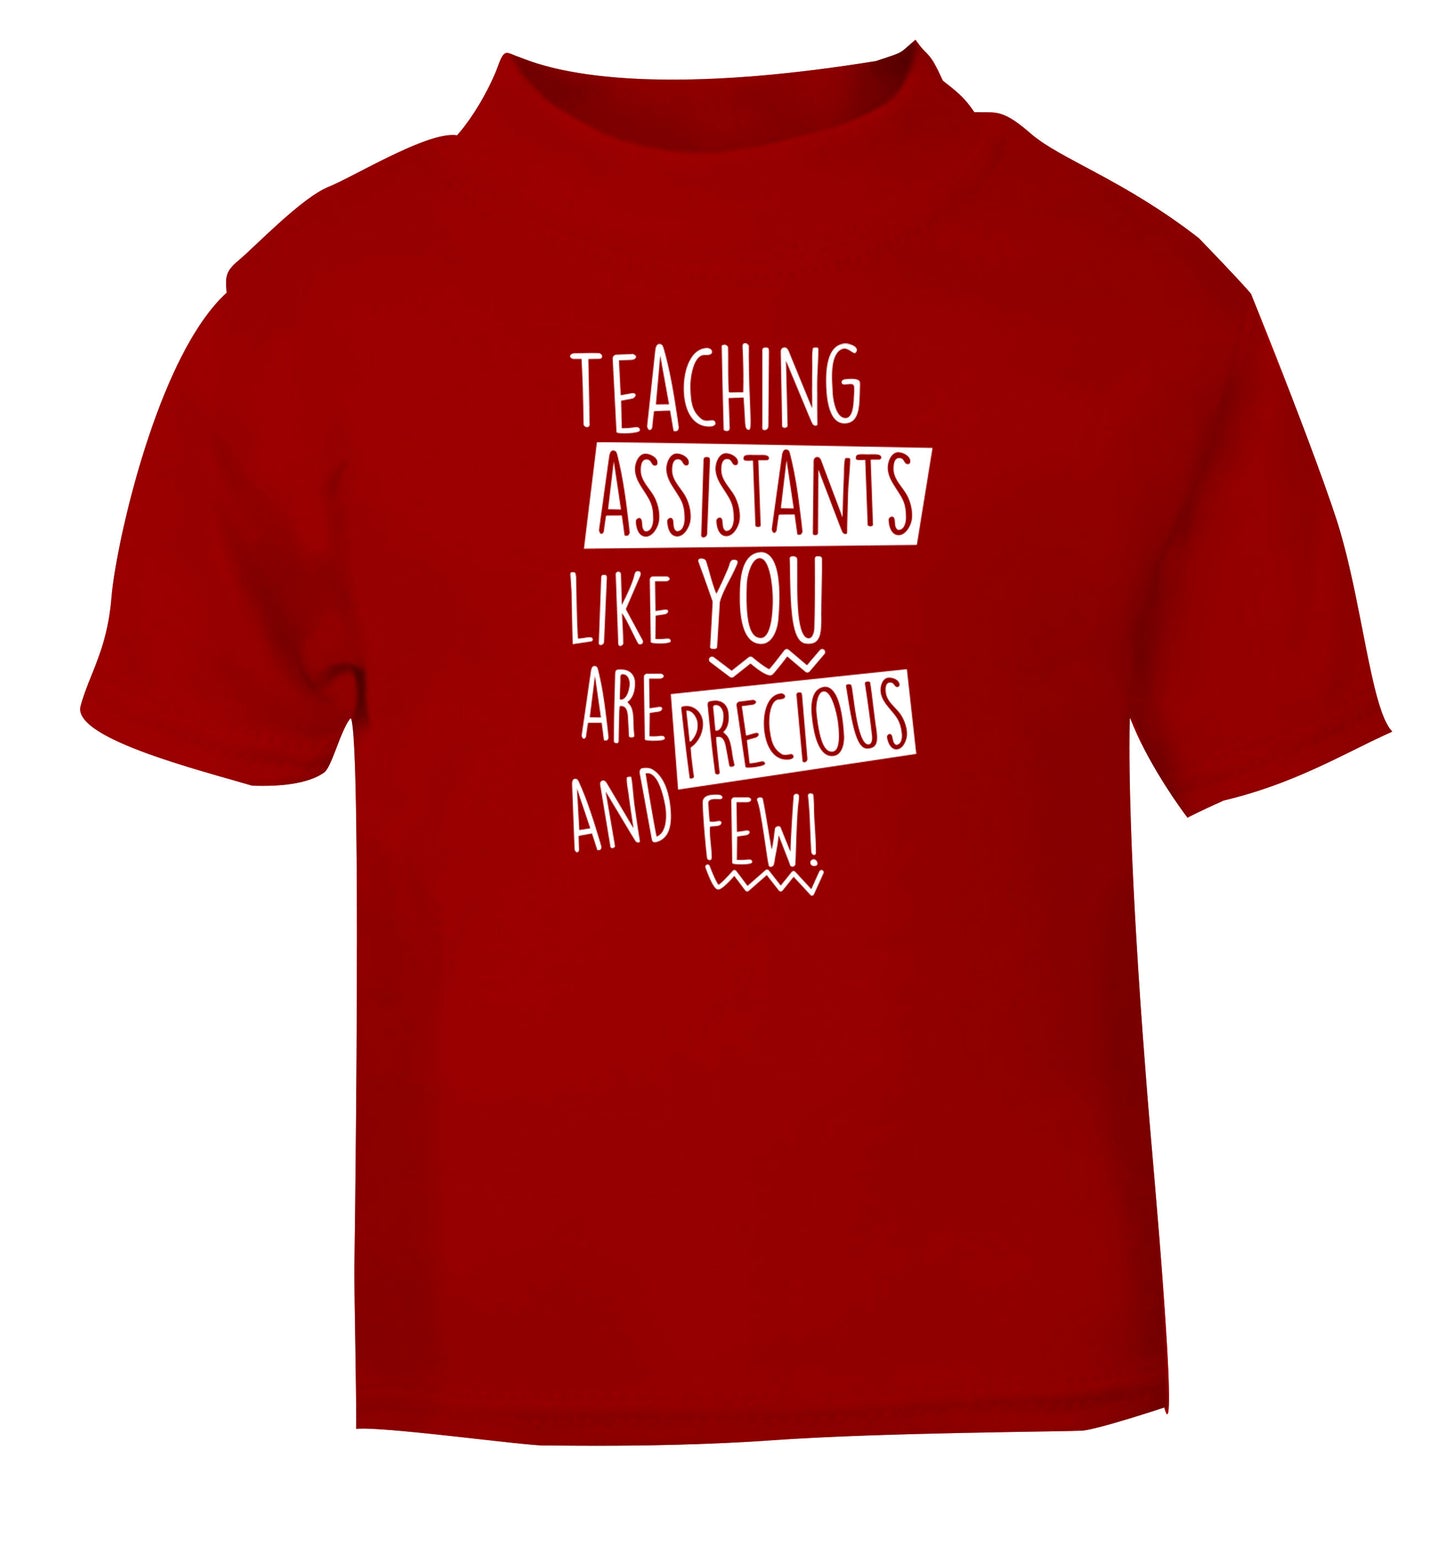 Teaching assistants like you are previous and few! red Baby Toddler Tshirt 2 Years